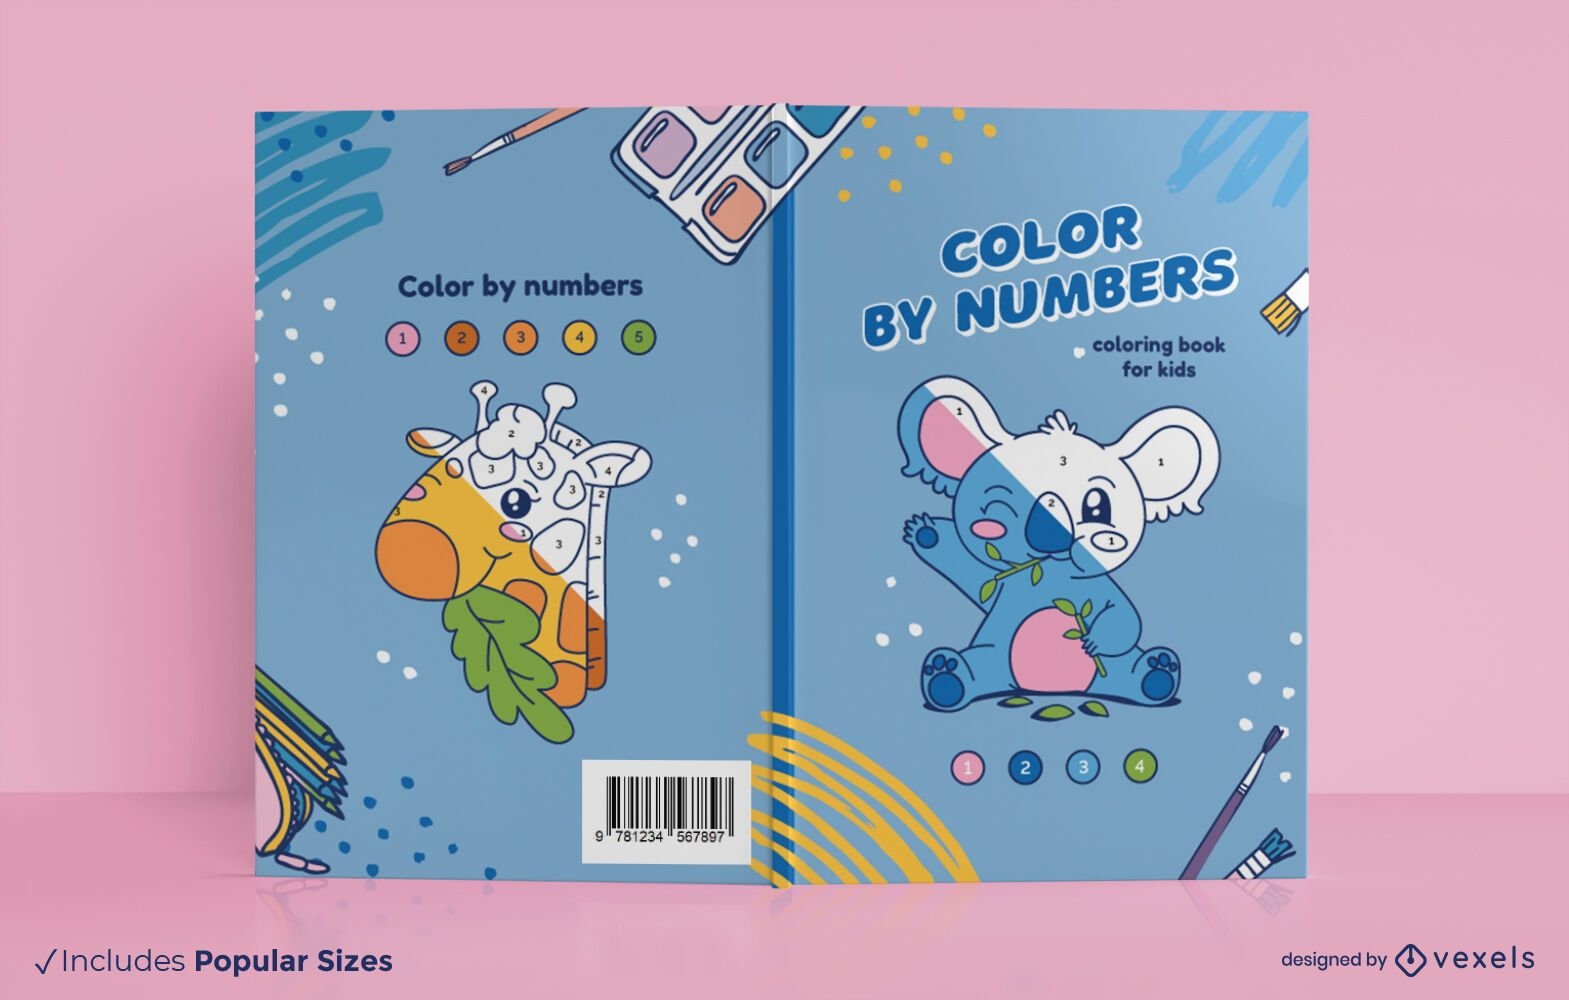 Color by numbers book cover design